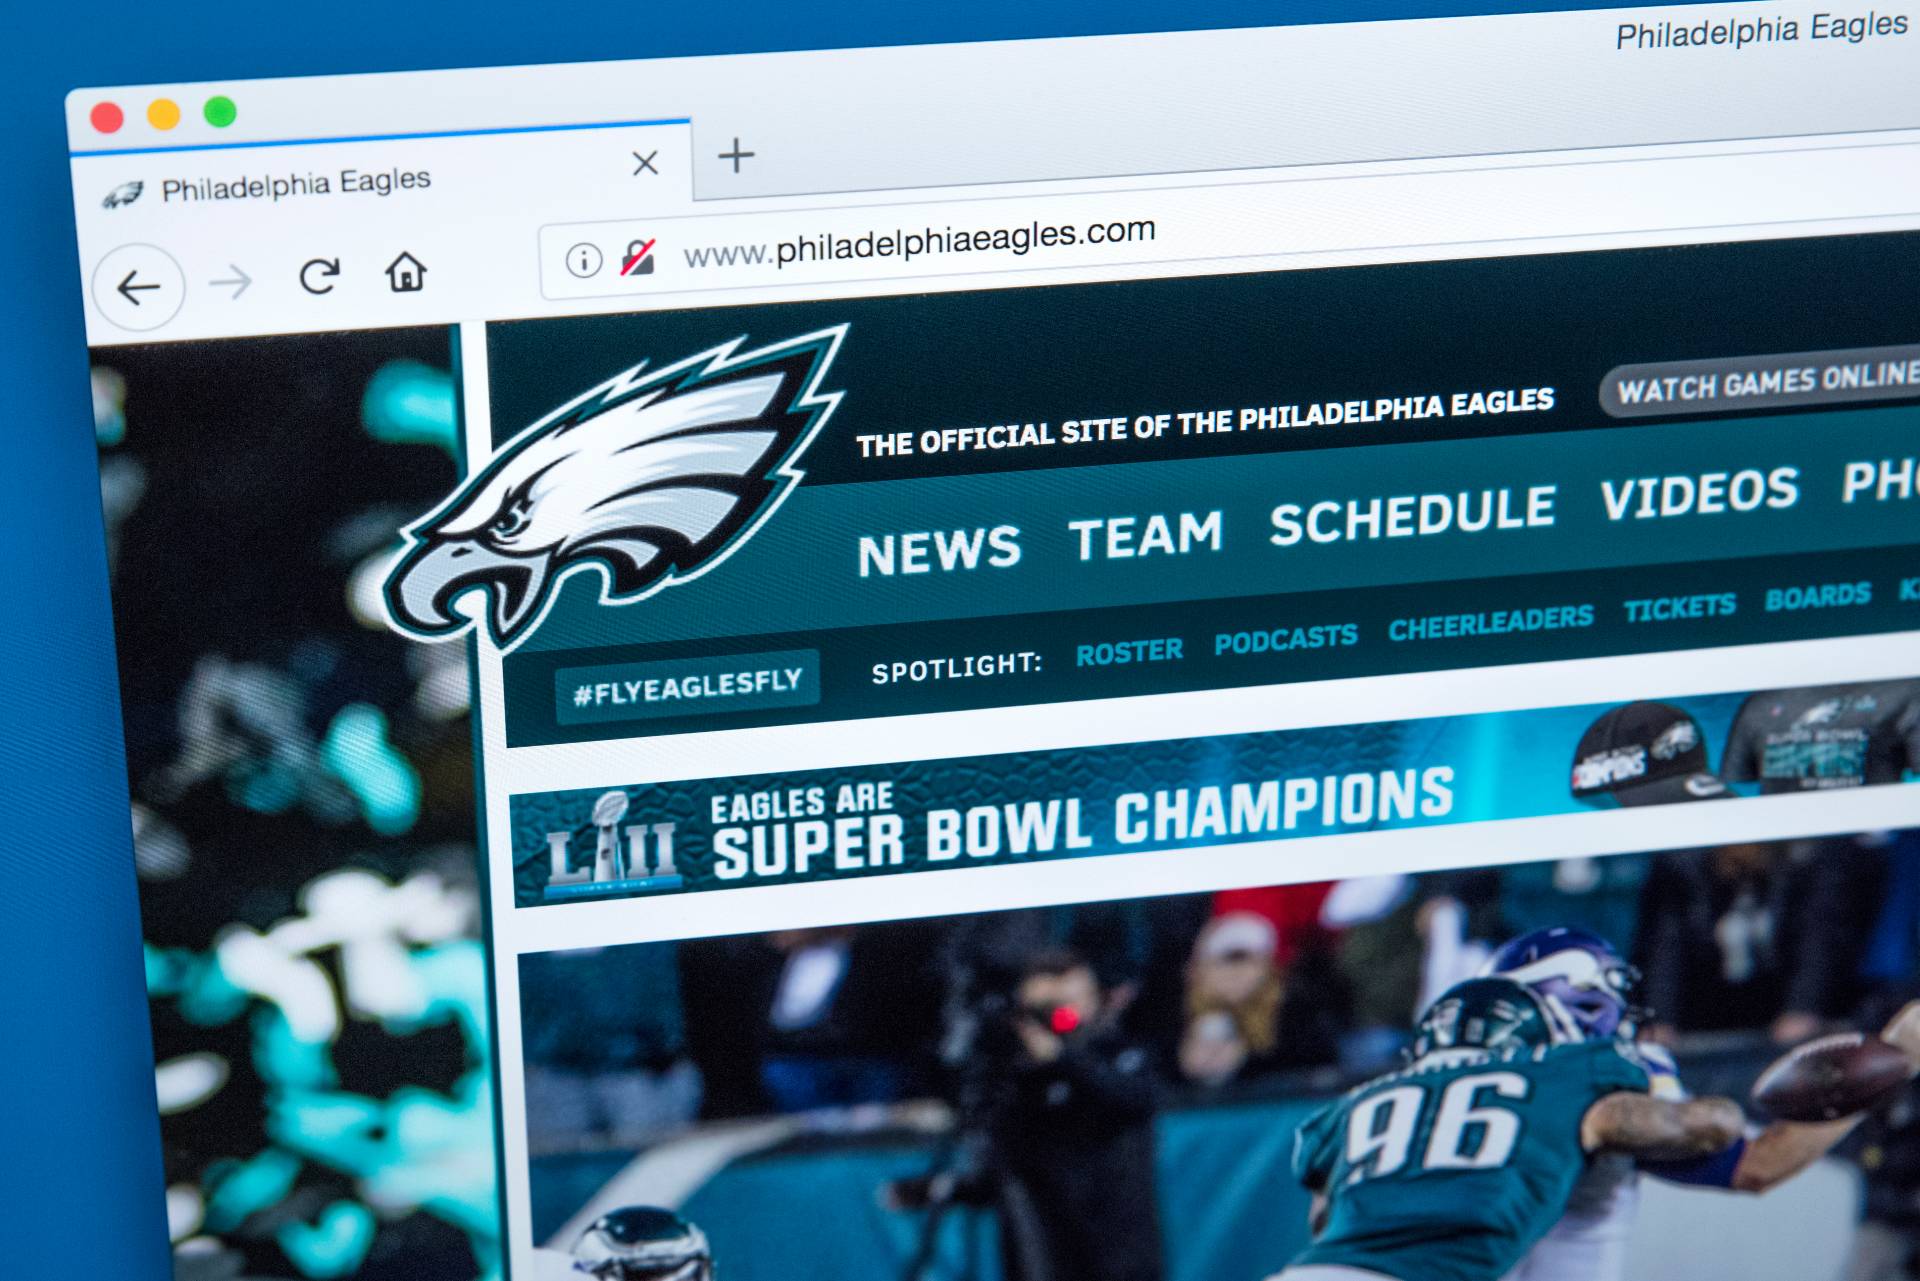 The homepage of the official website for the Philadelphia Eagles